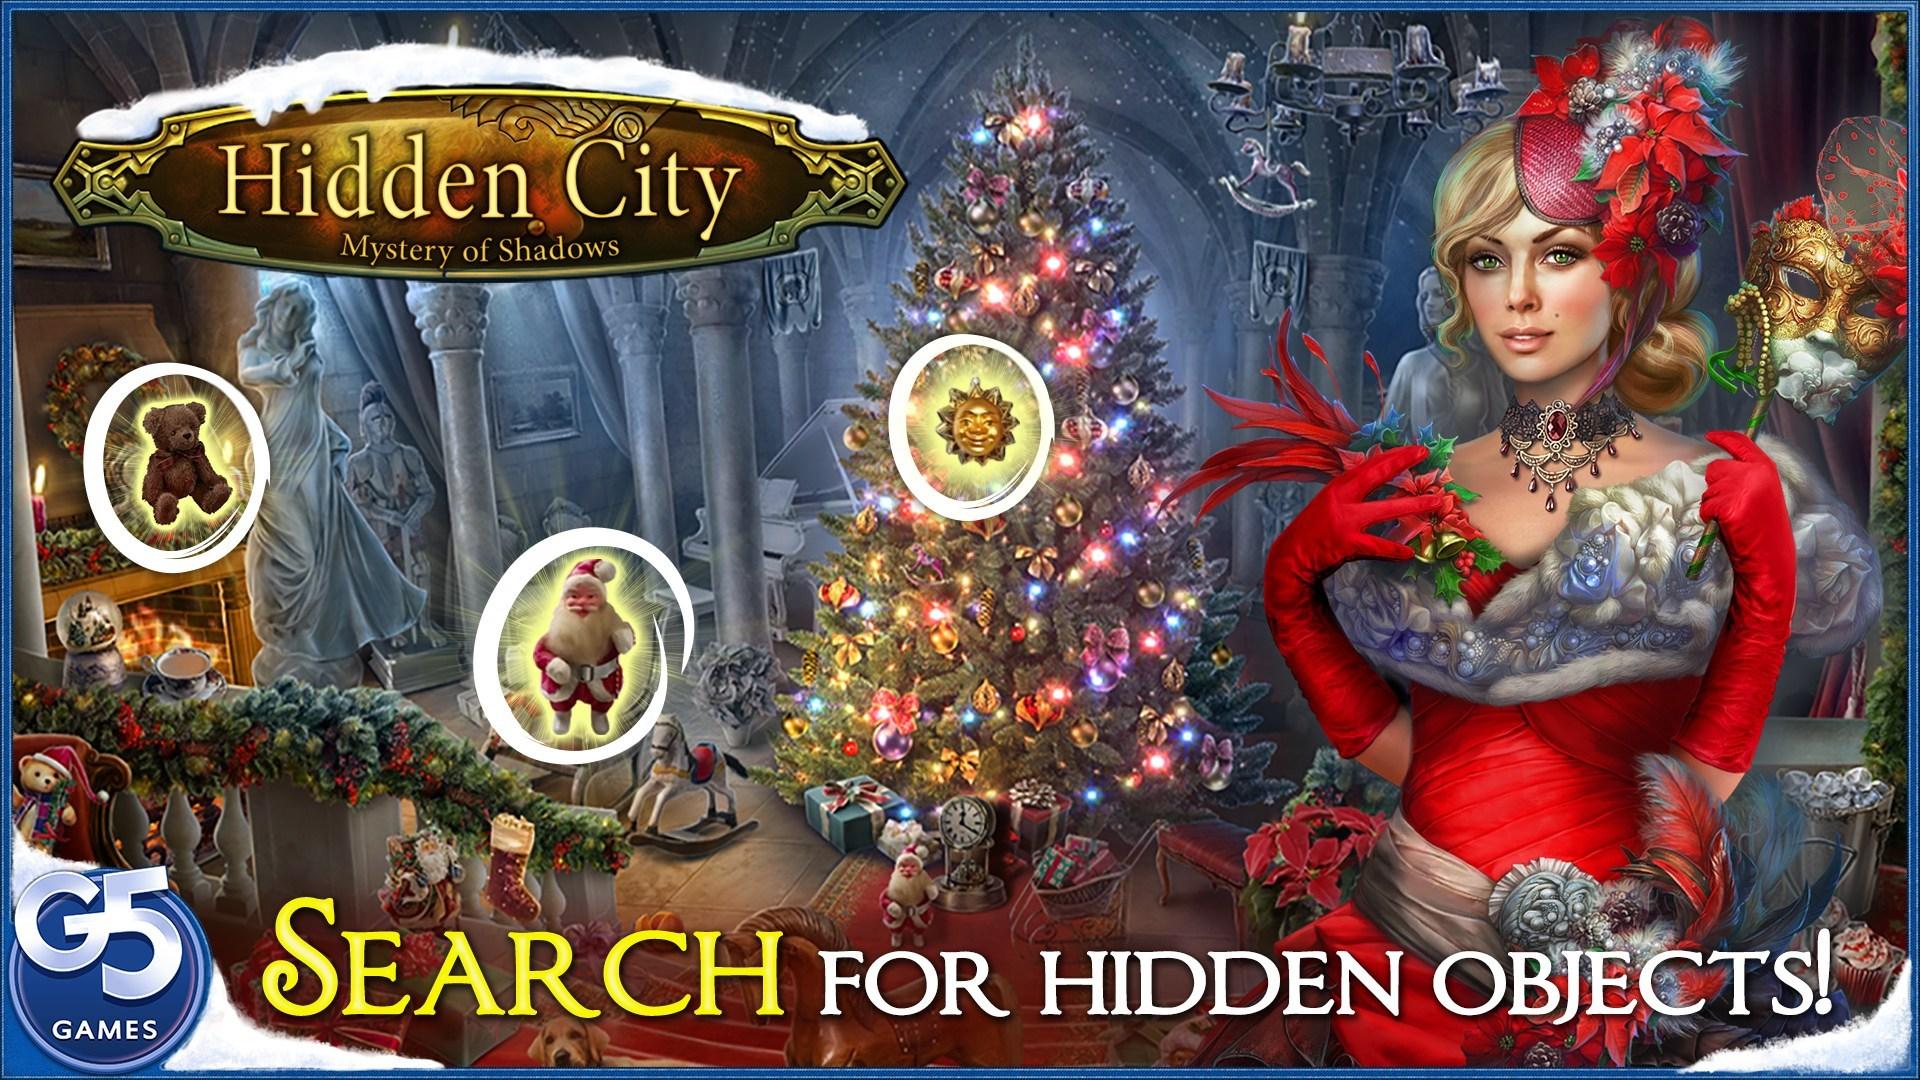 Spread Holiday Cheer with Hidden City: Mystery of Shadows